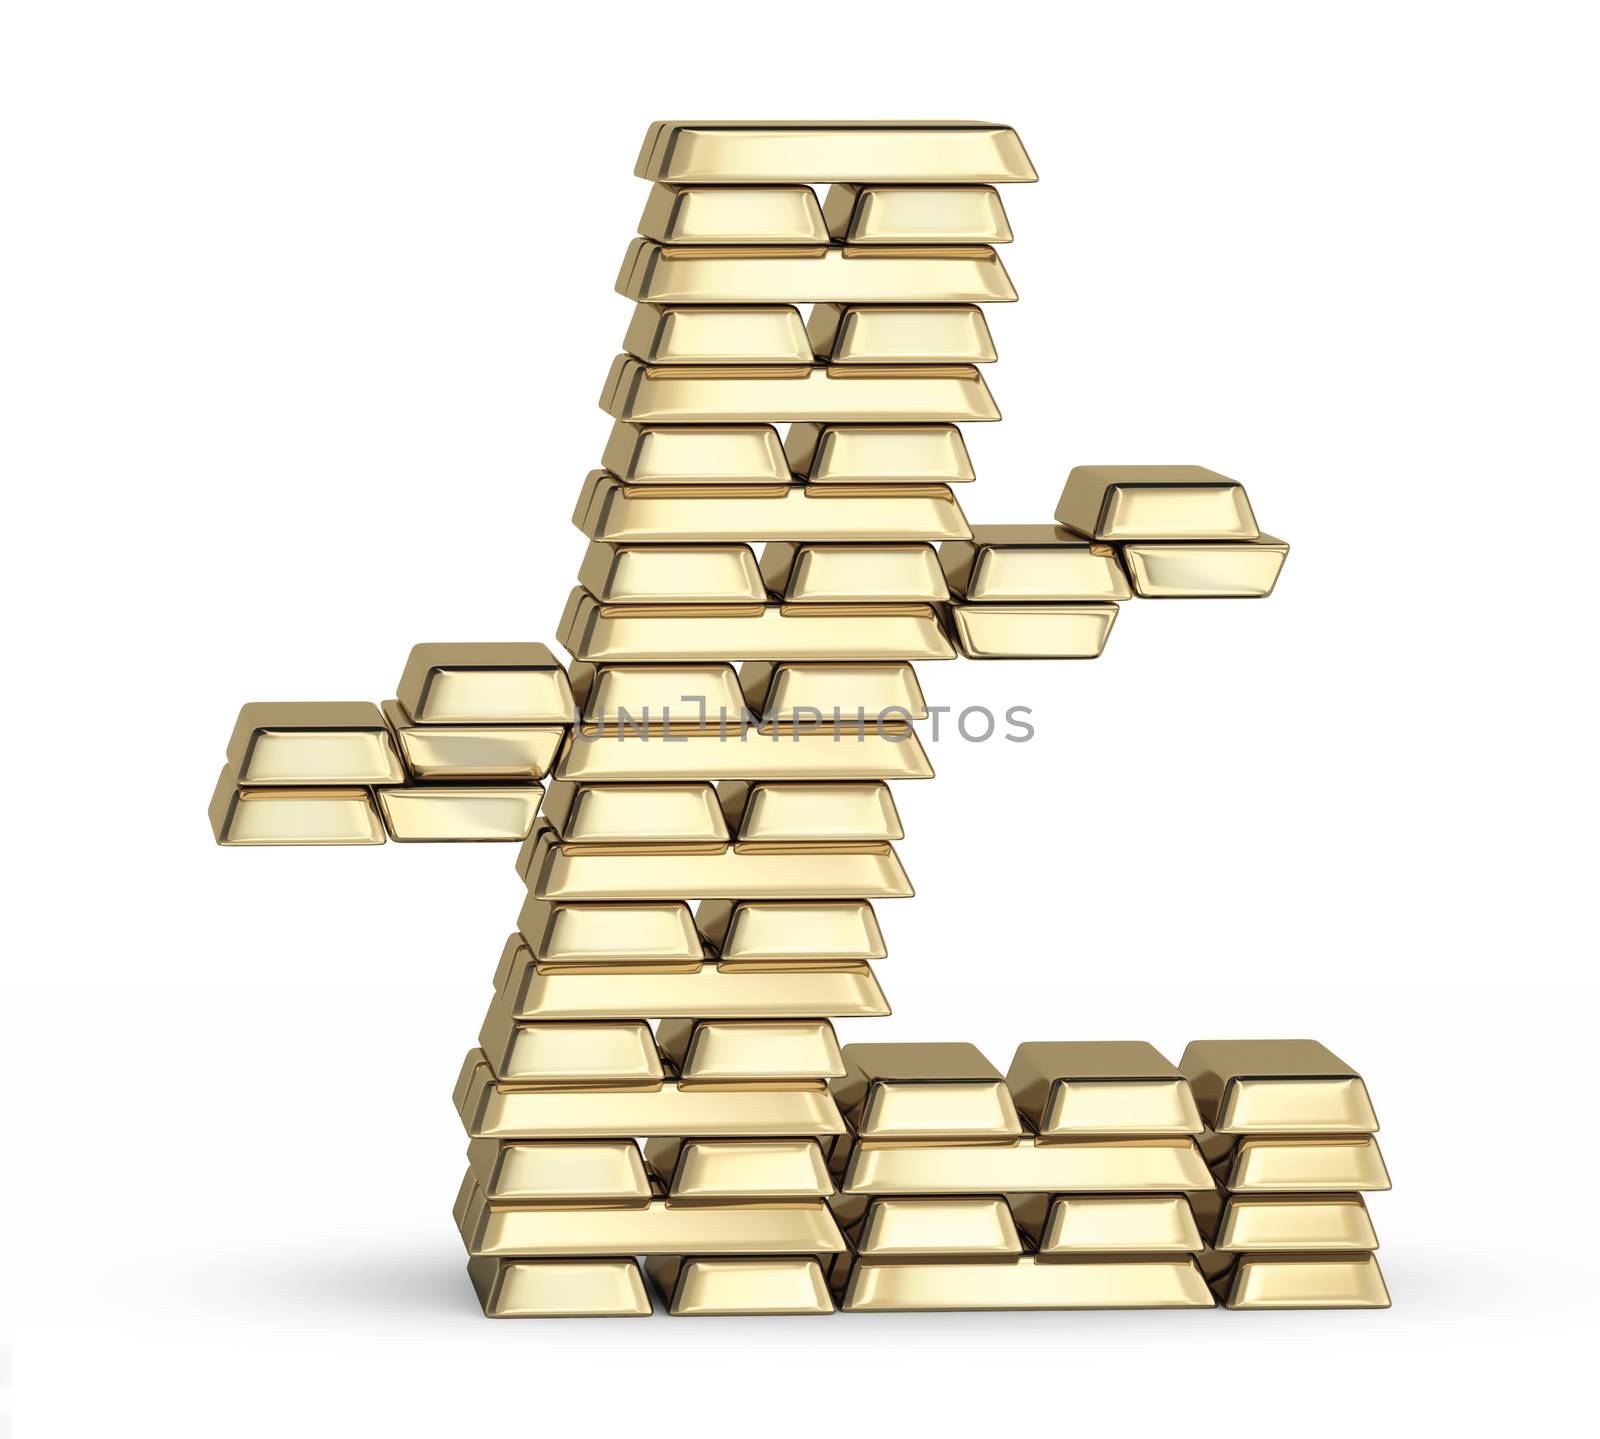 Litecoin symbol from gold bars by iunewind